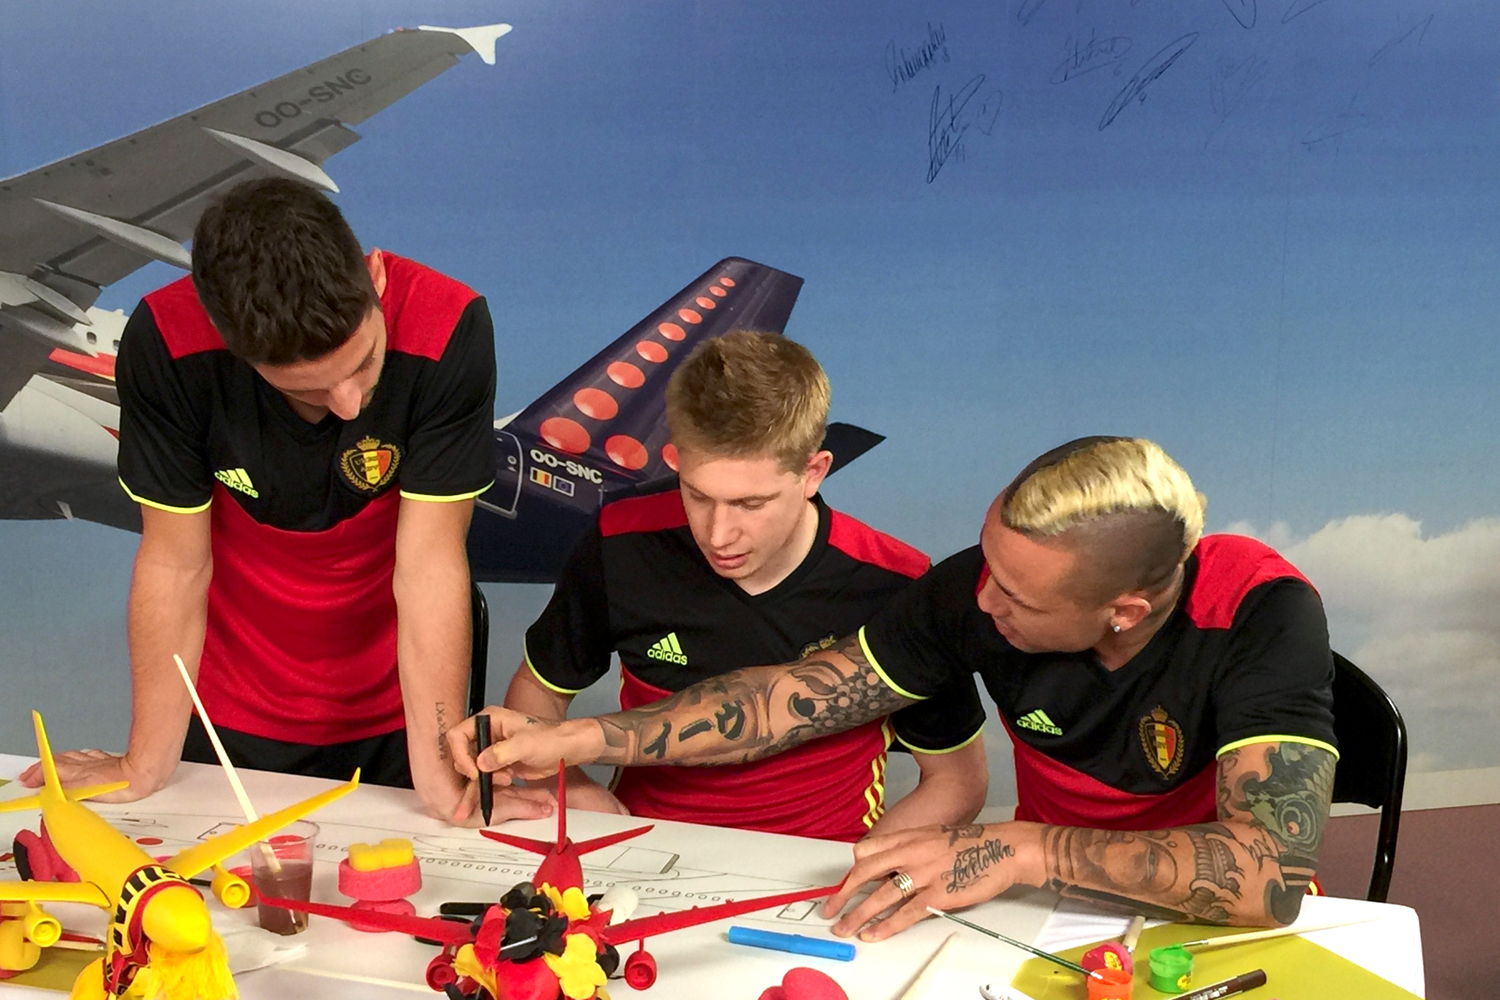 The Red Devils work on the design of 'their' plane